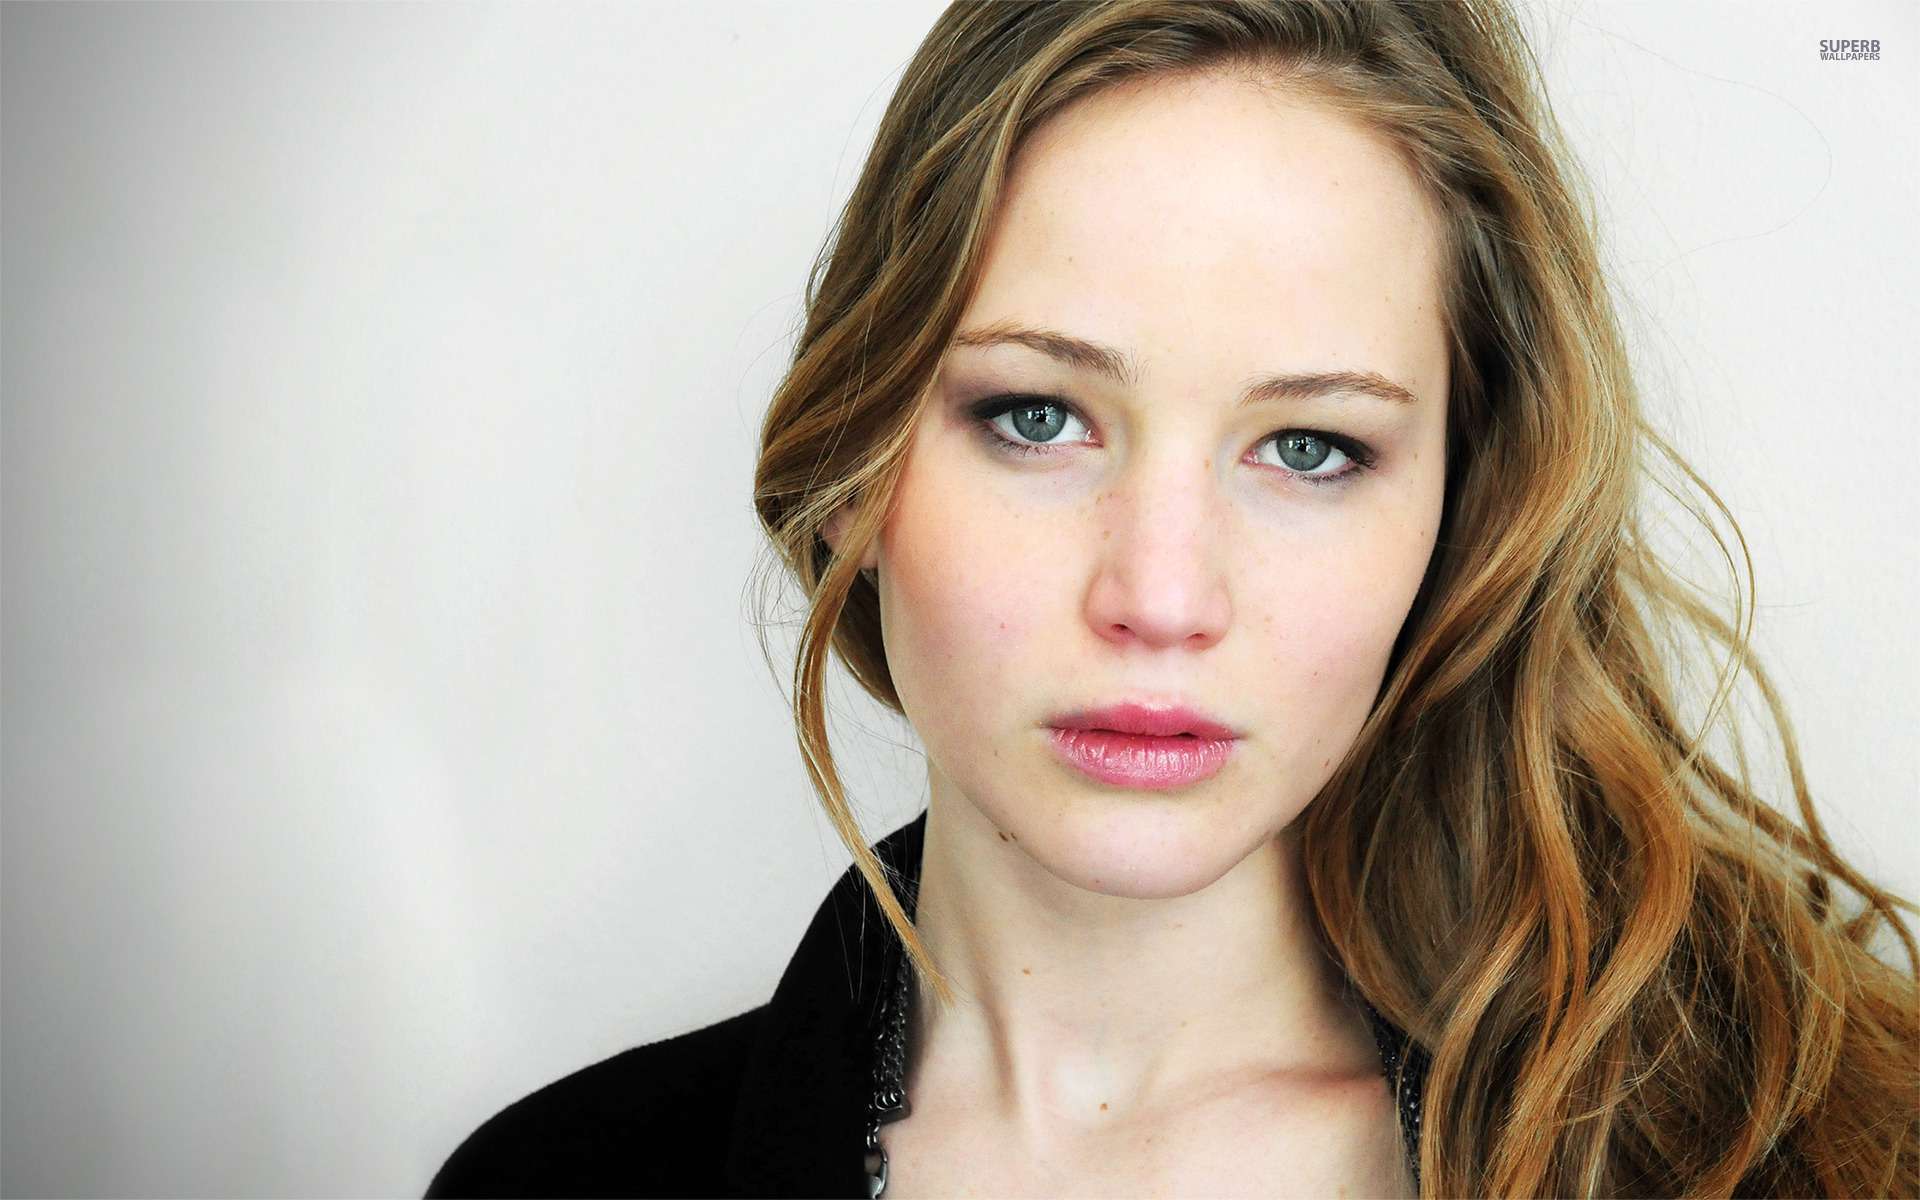 Best Jennifer Lawrence HD Wallpaper Picture, image and Photo 2019